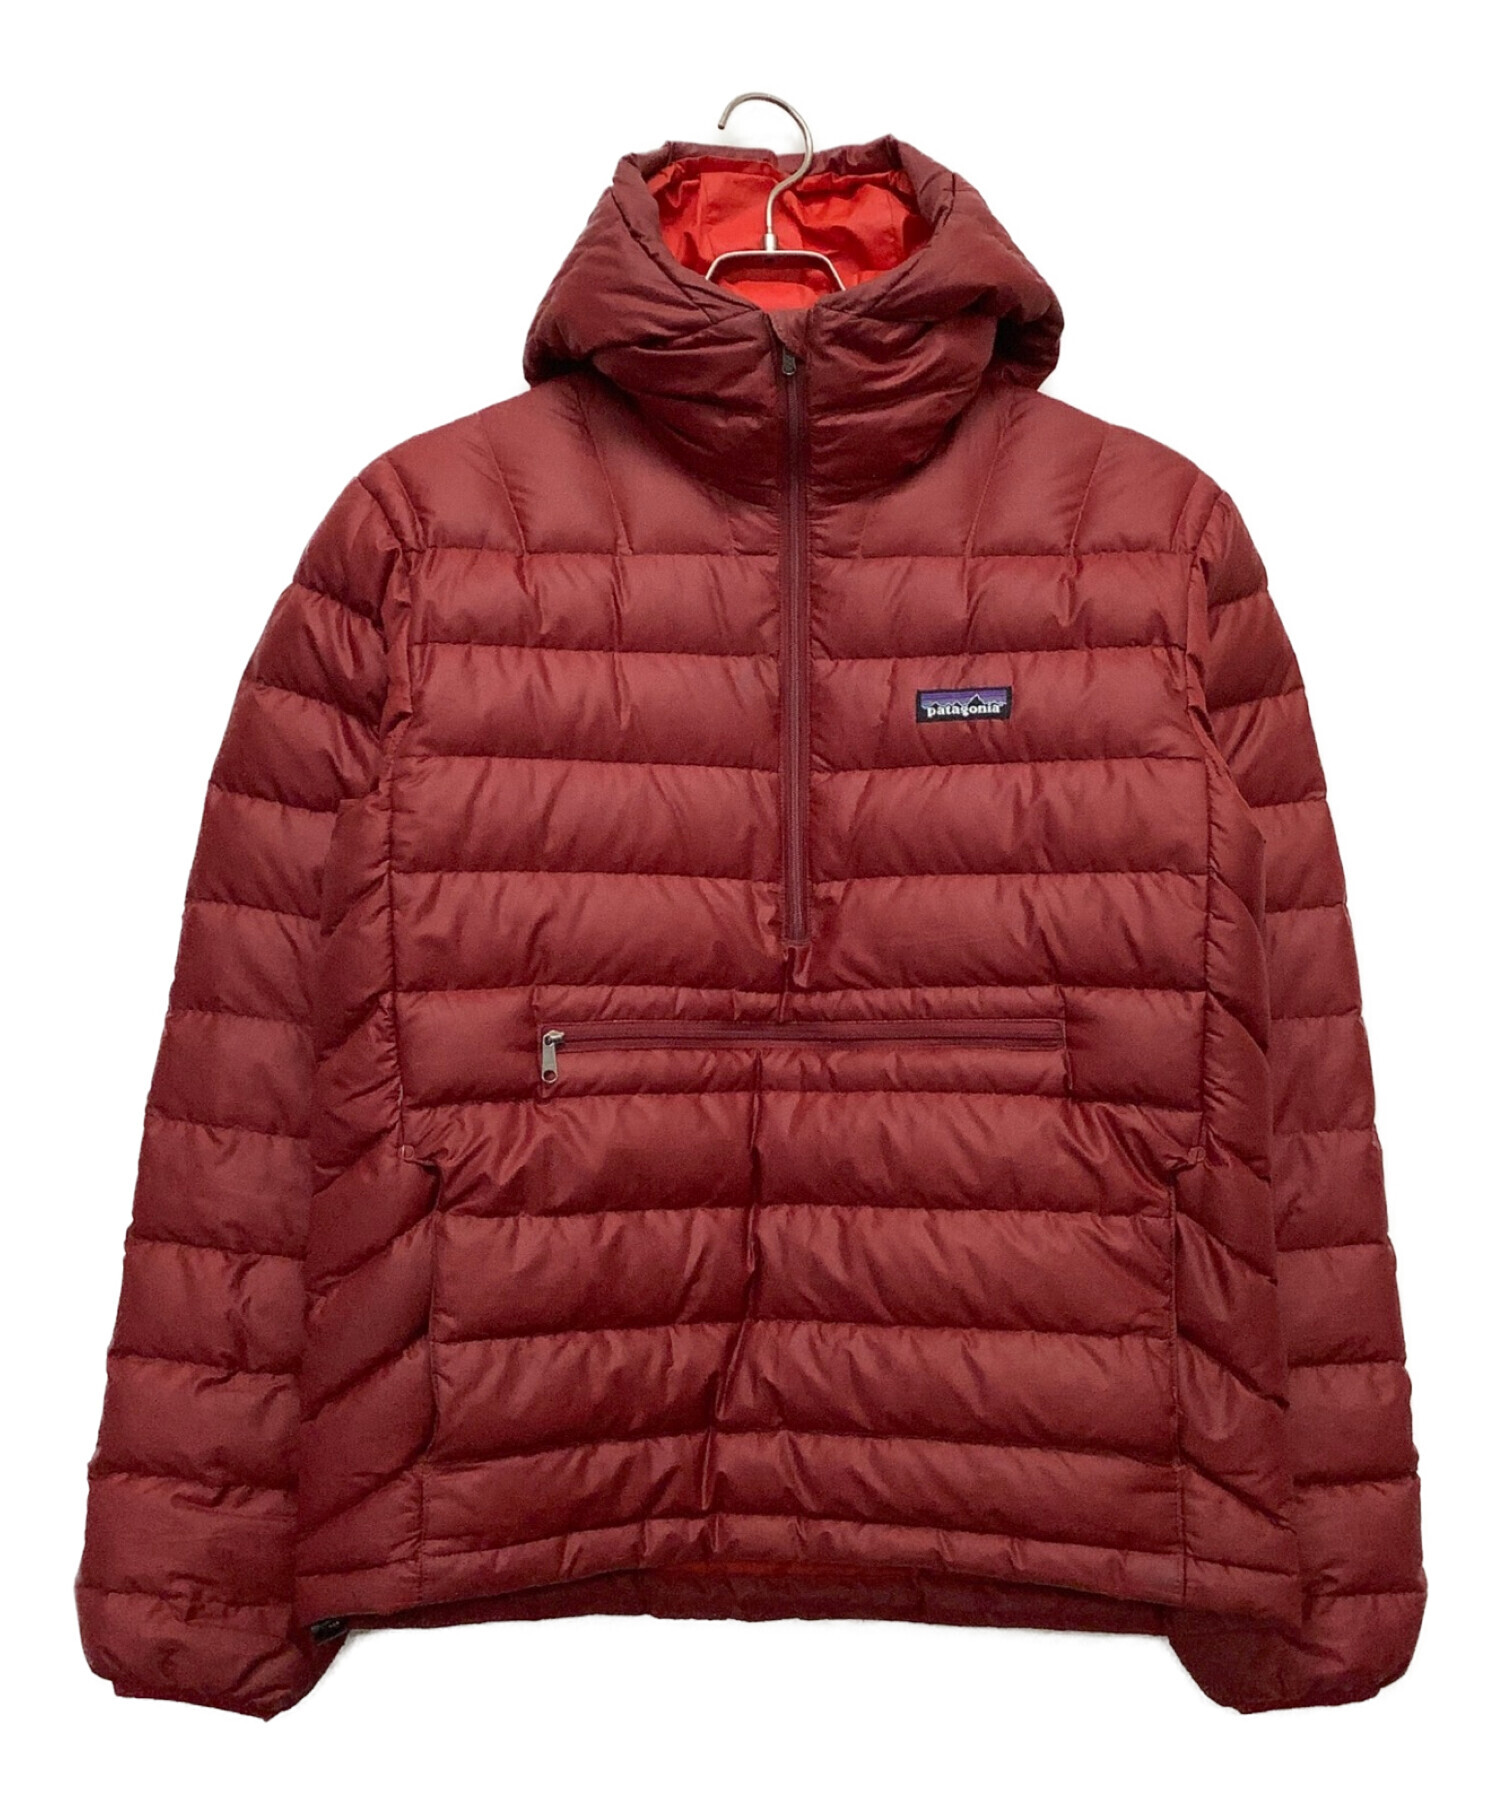 Patagonia ダウンセーター 2011年製 レア size S